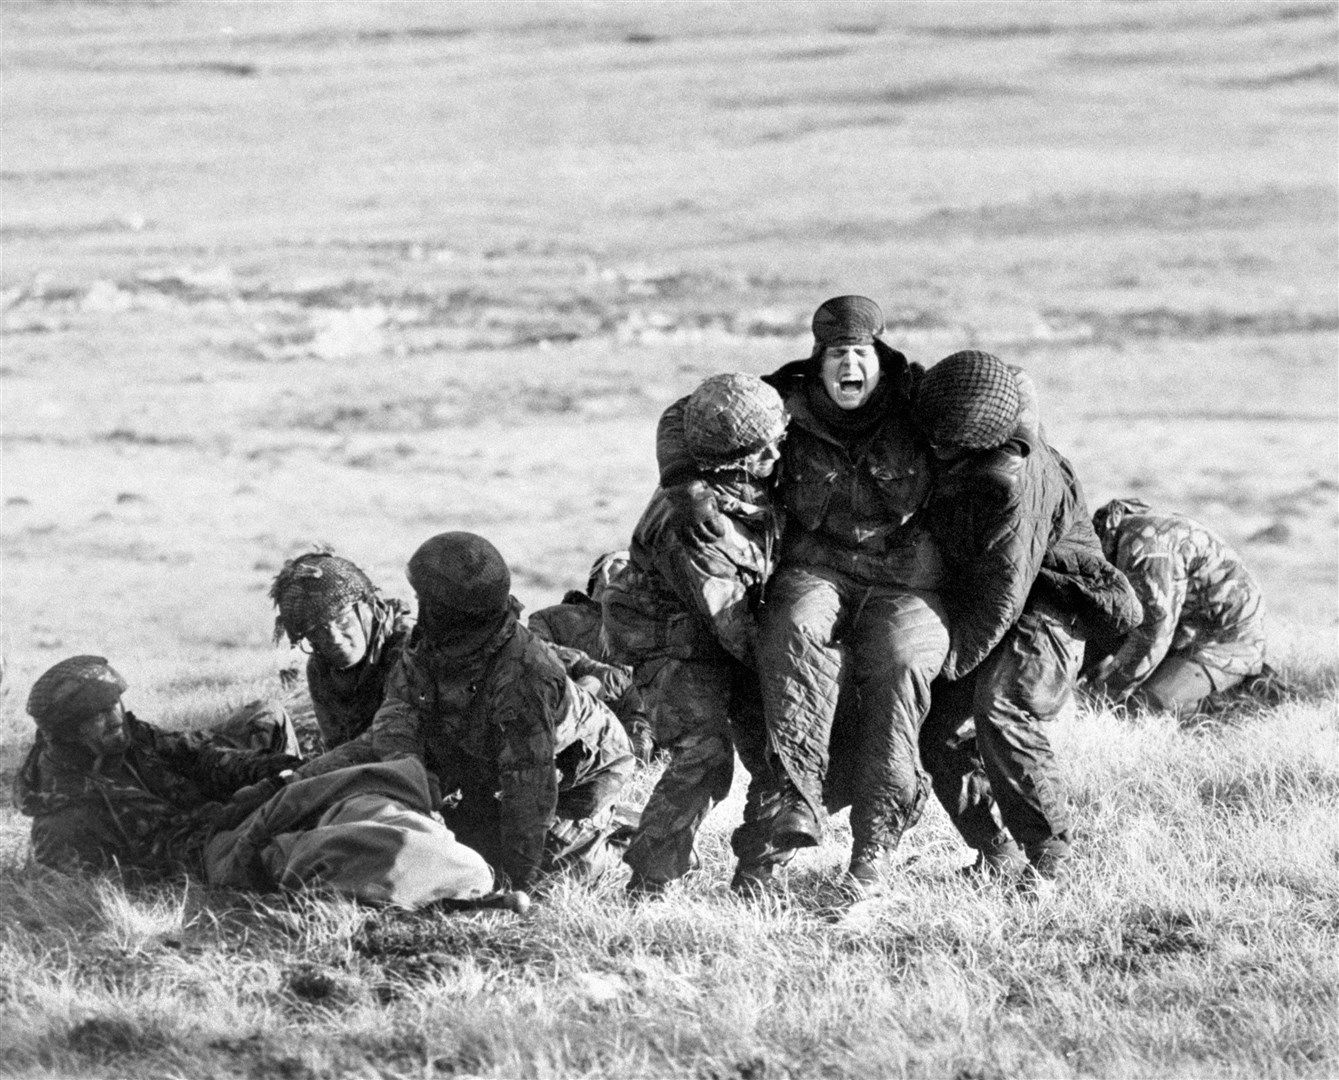 British paratroopers treating wounded comrades while under fire on Mount Longdon during the Falklands campaign (PA)